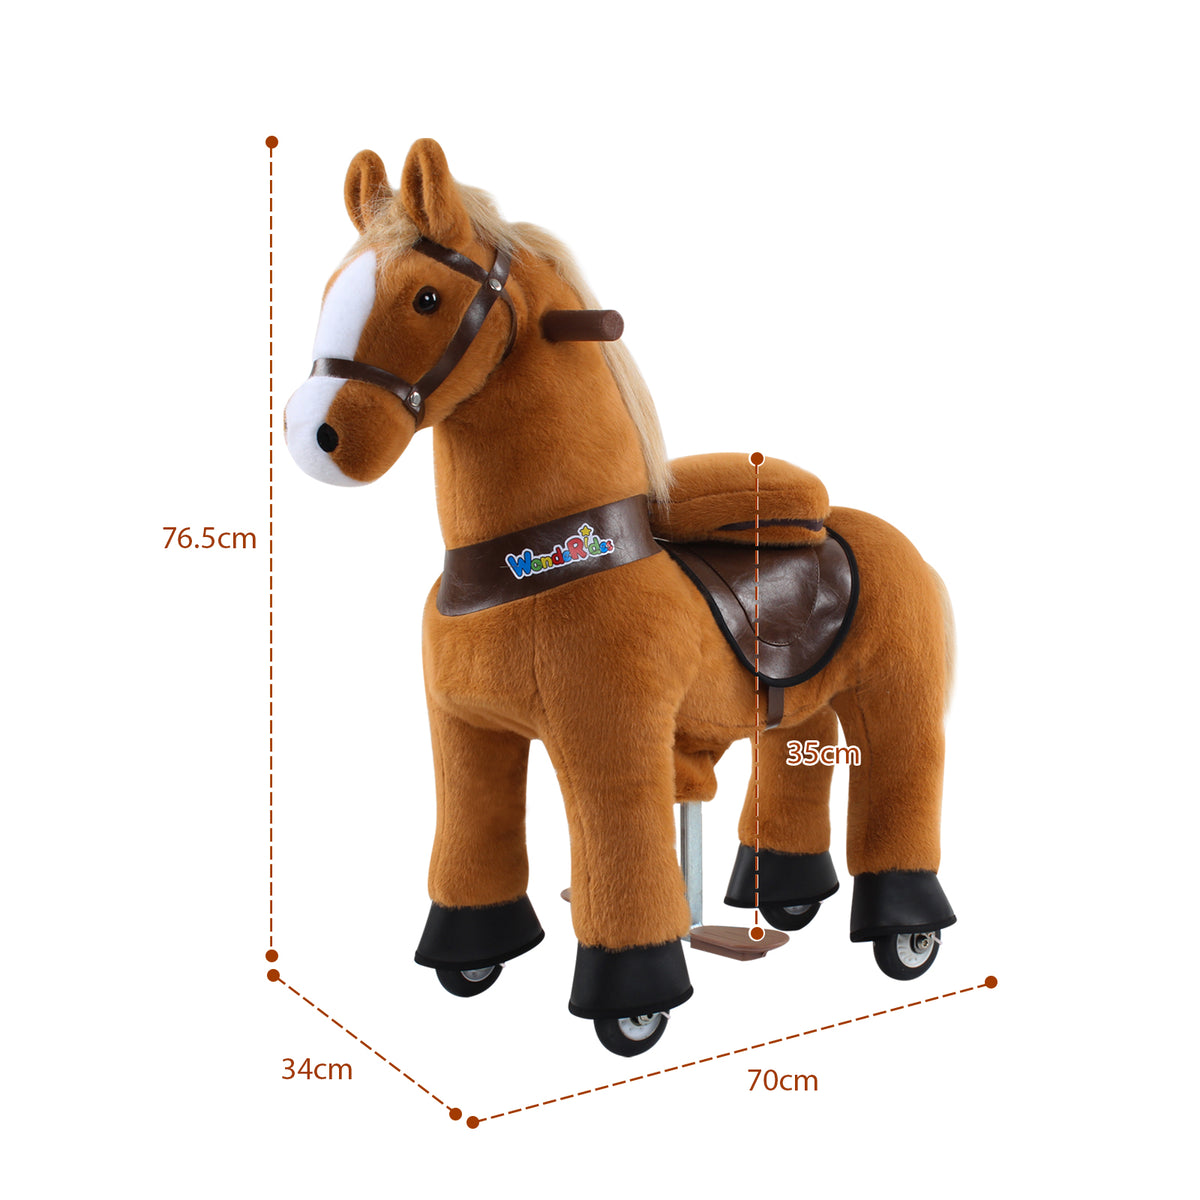 WondeRides Ride-on Toy Size 3 for Age 3-5 Brown Horse